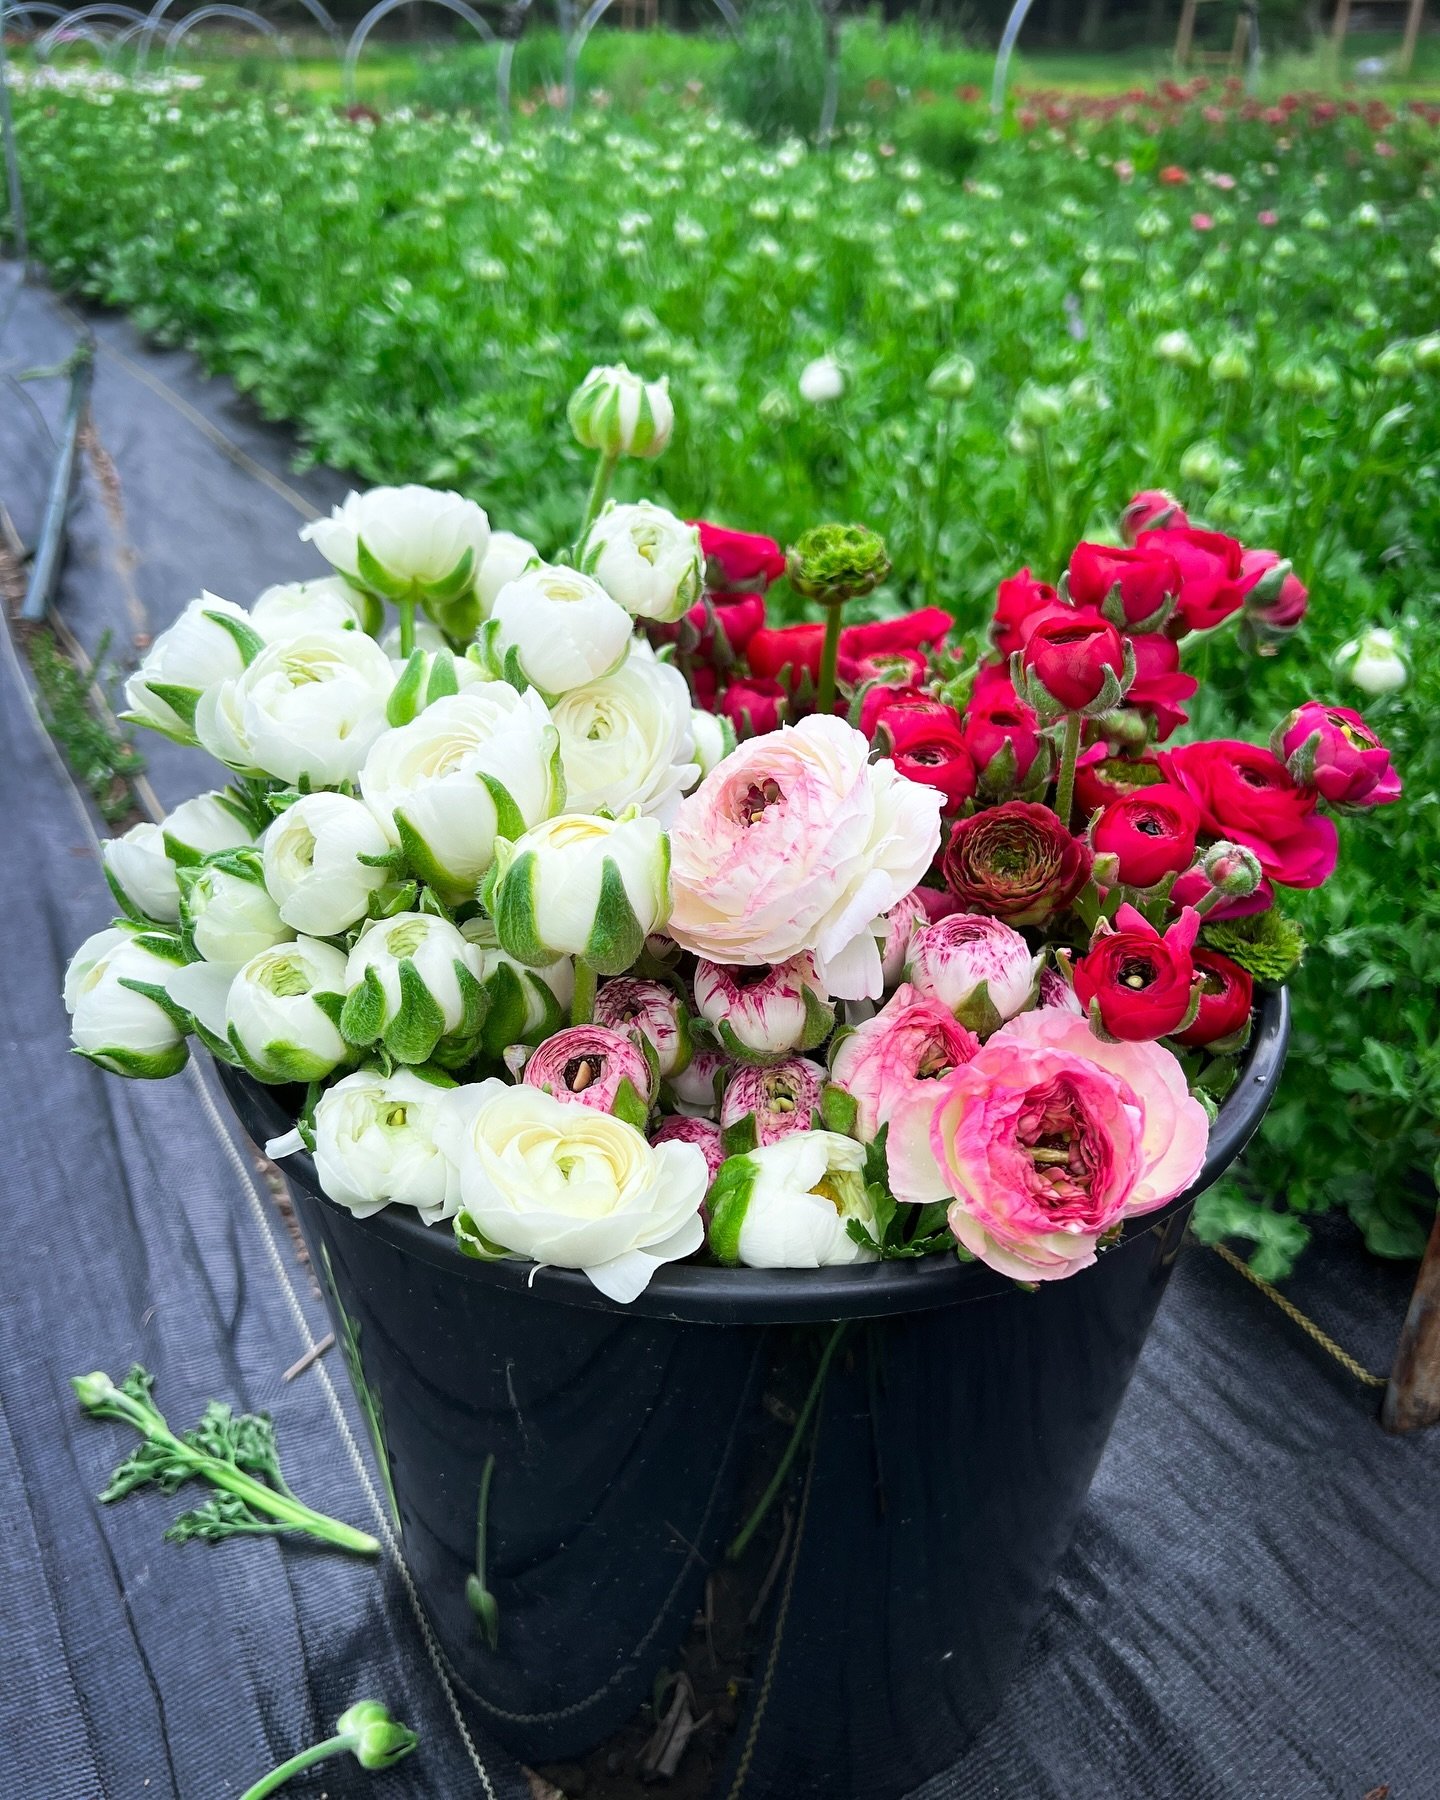 Buckets of these coming in from the field between rainstorms. Or sometimes, when we&rsquo;re really lucky, in the middle of a rainstorm.
.
.
.
#mothersday #mothersdayflowers #ranunculus #springflowers #mayfieldfarm #mayfieldfarmwv #morgantownflowerfa